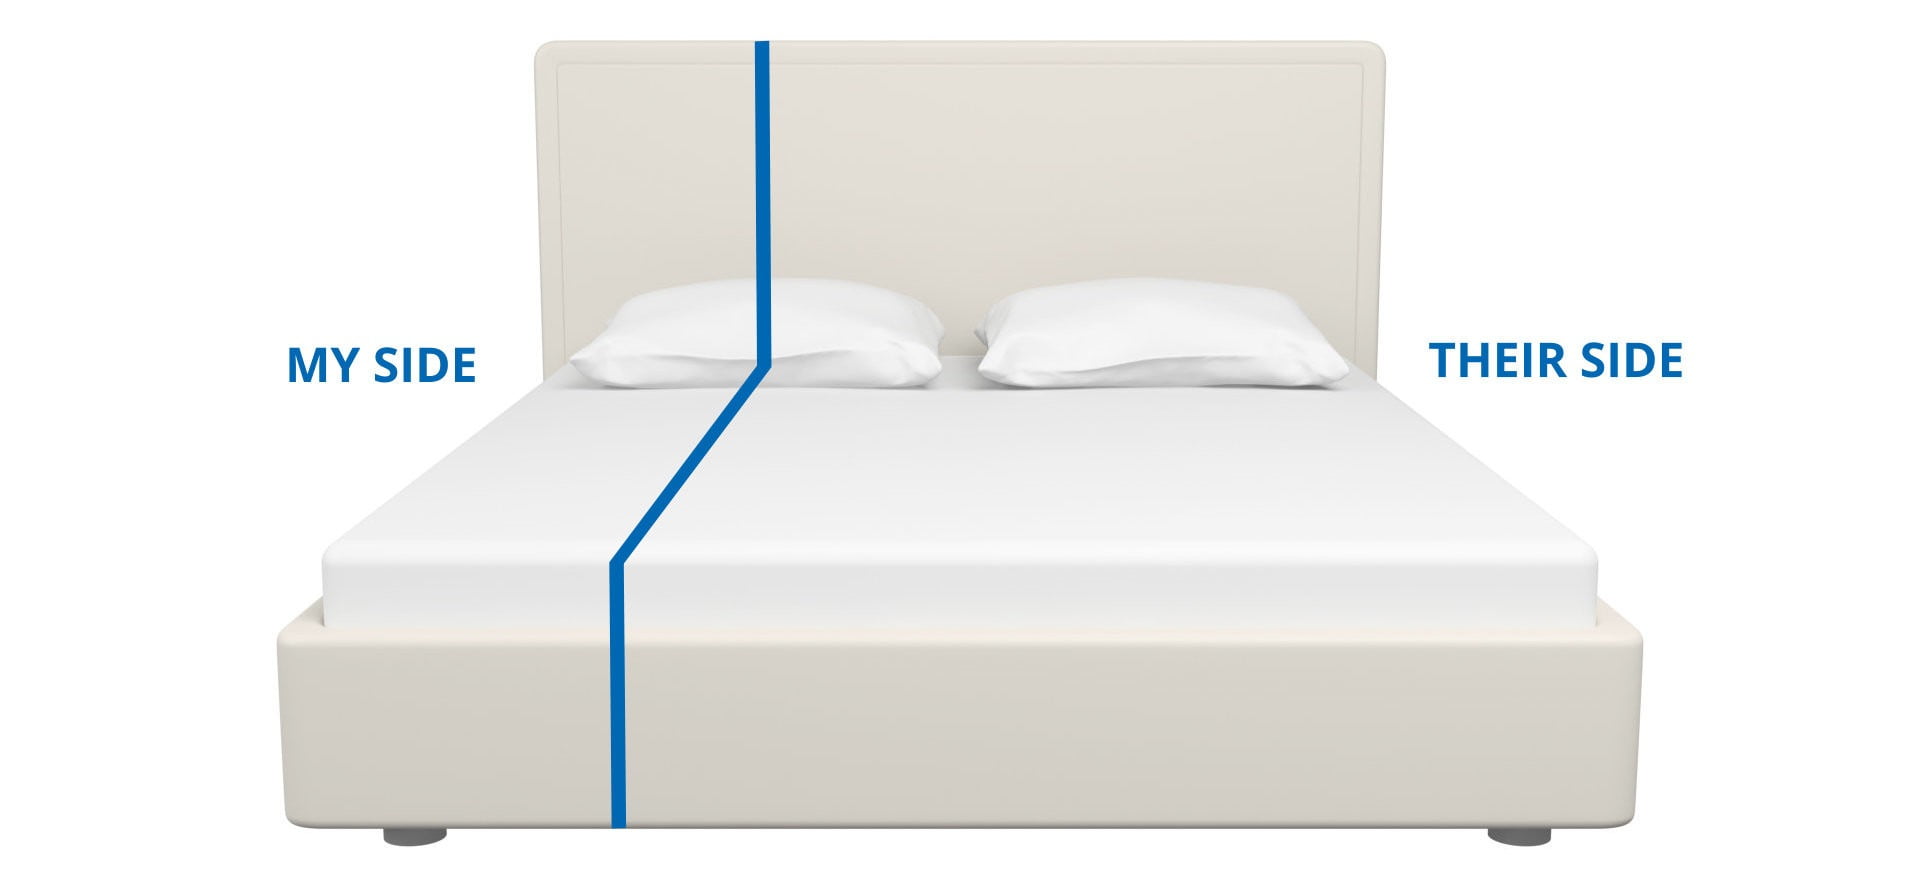 Bed Sizes Uk And Mattress Size, Super King Size Bed Frame Measurements